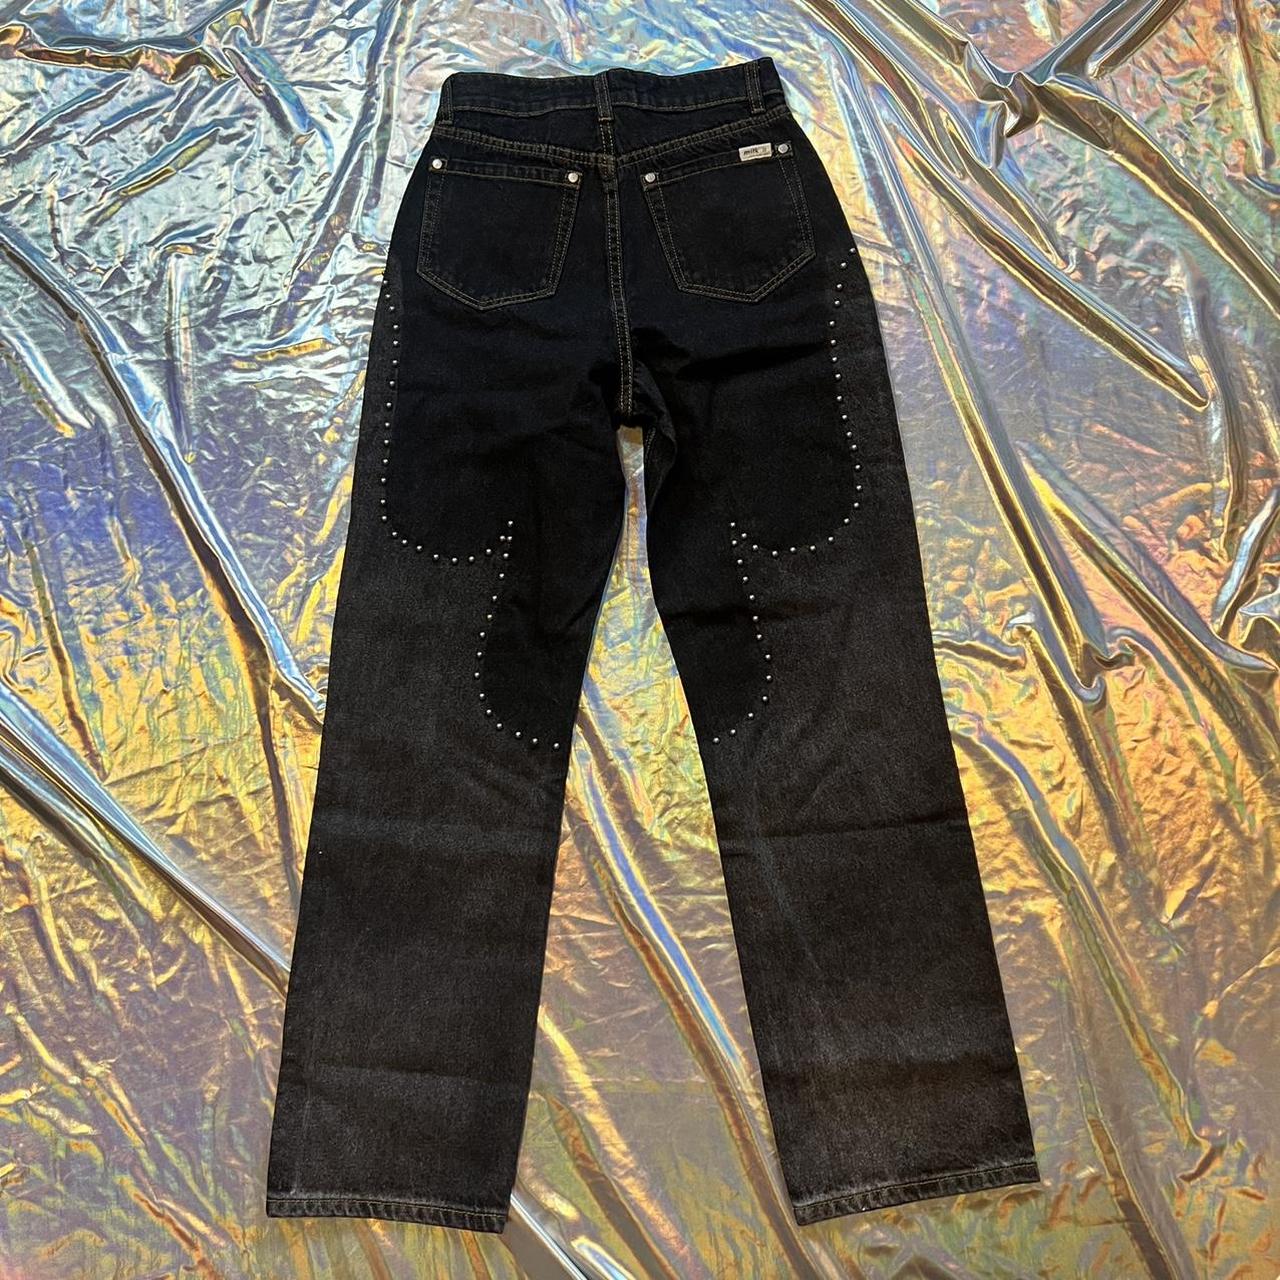 Product Image 2 - Milk It Jeans 

“These jeans